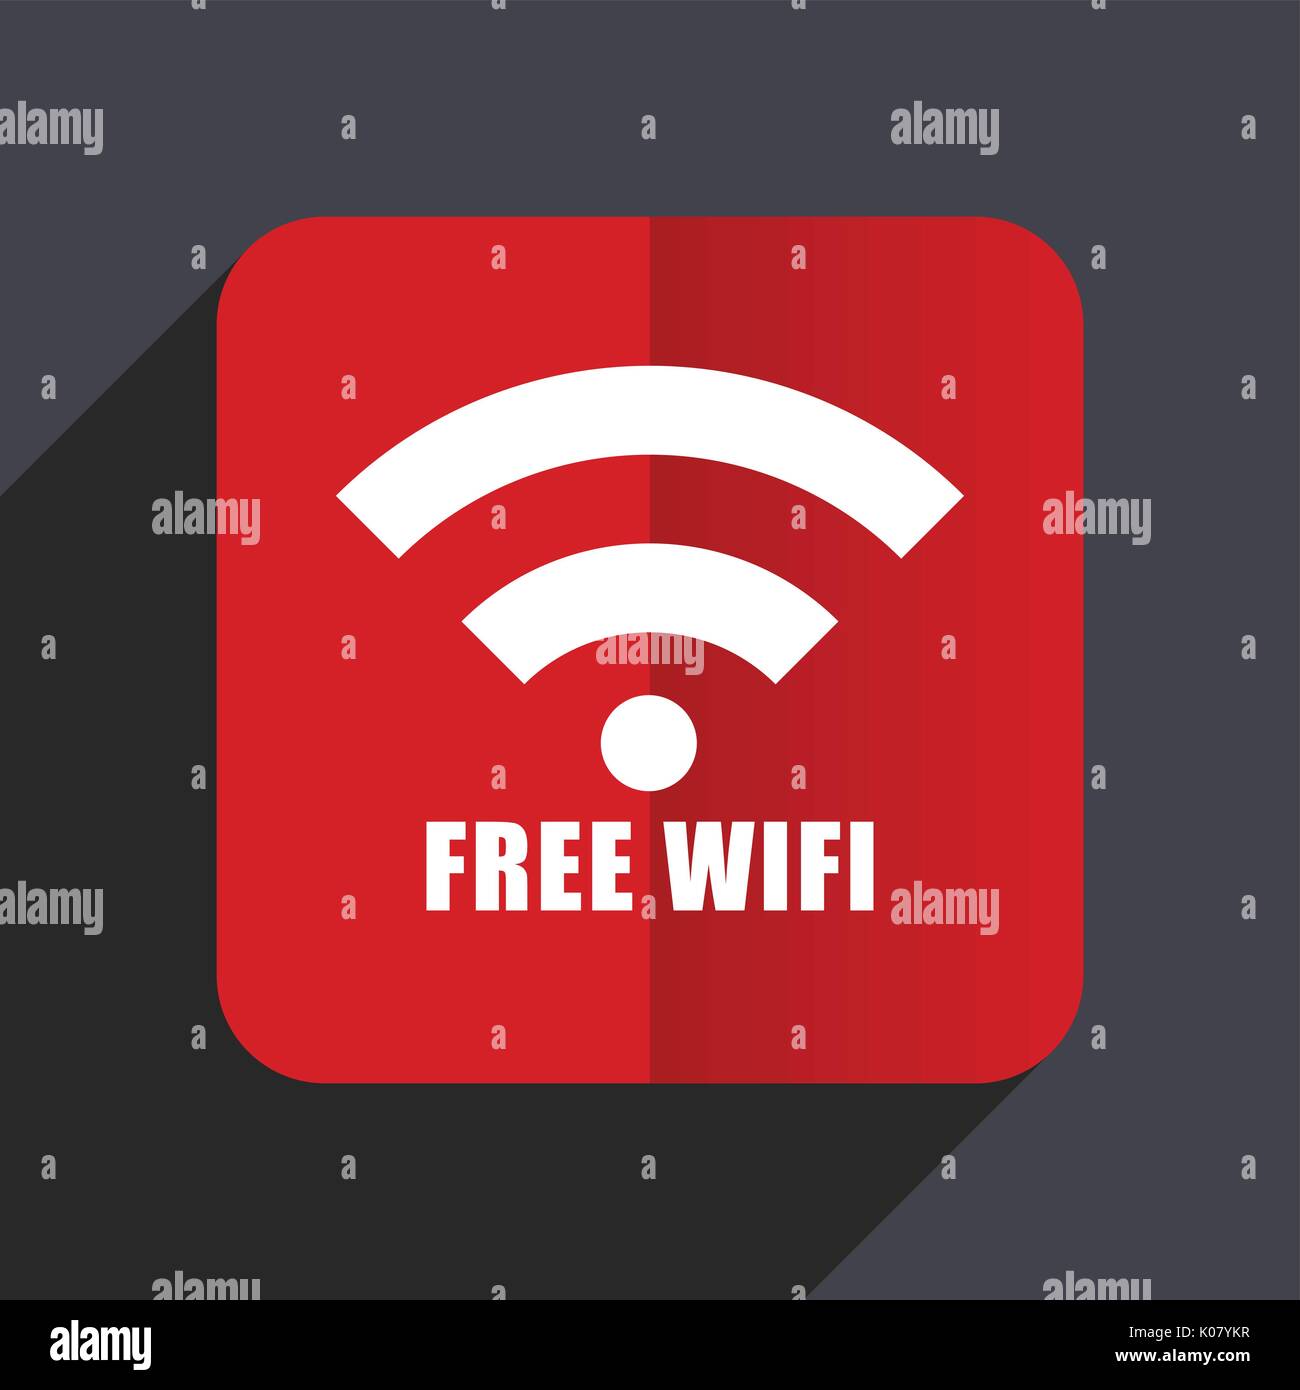 Download Free Wifi Flat Design Web Vector Icon Red Square Sign On Gray Background In Eps 10 Stock Vector Image Art Alamy